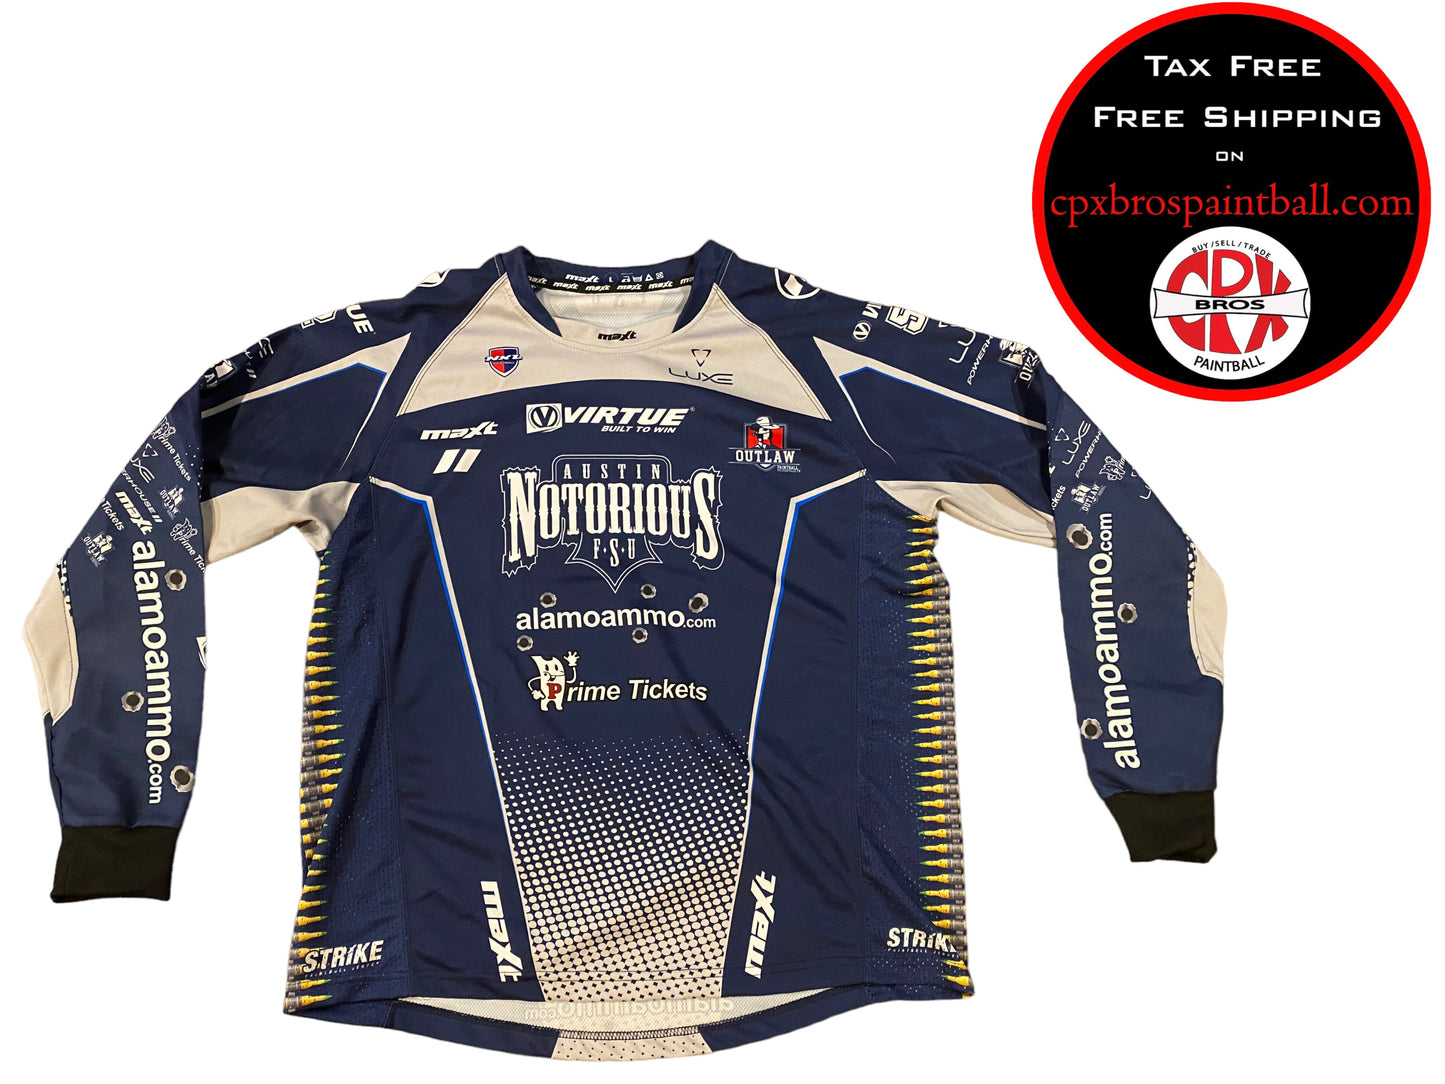 Used Austin Notorious Paintball Pro Jersey size L Paintball Gun from CPXBrosPaintball Buy/Sell/Trade Paintball Markers, Paintball Hoppers, Paintball Masks, and Hormesis Headbands